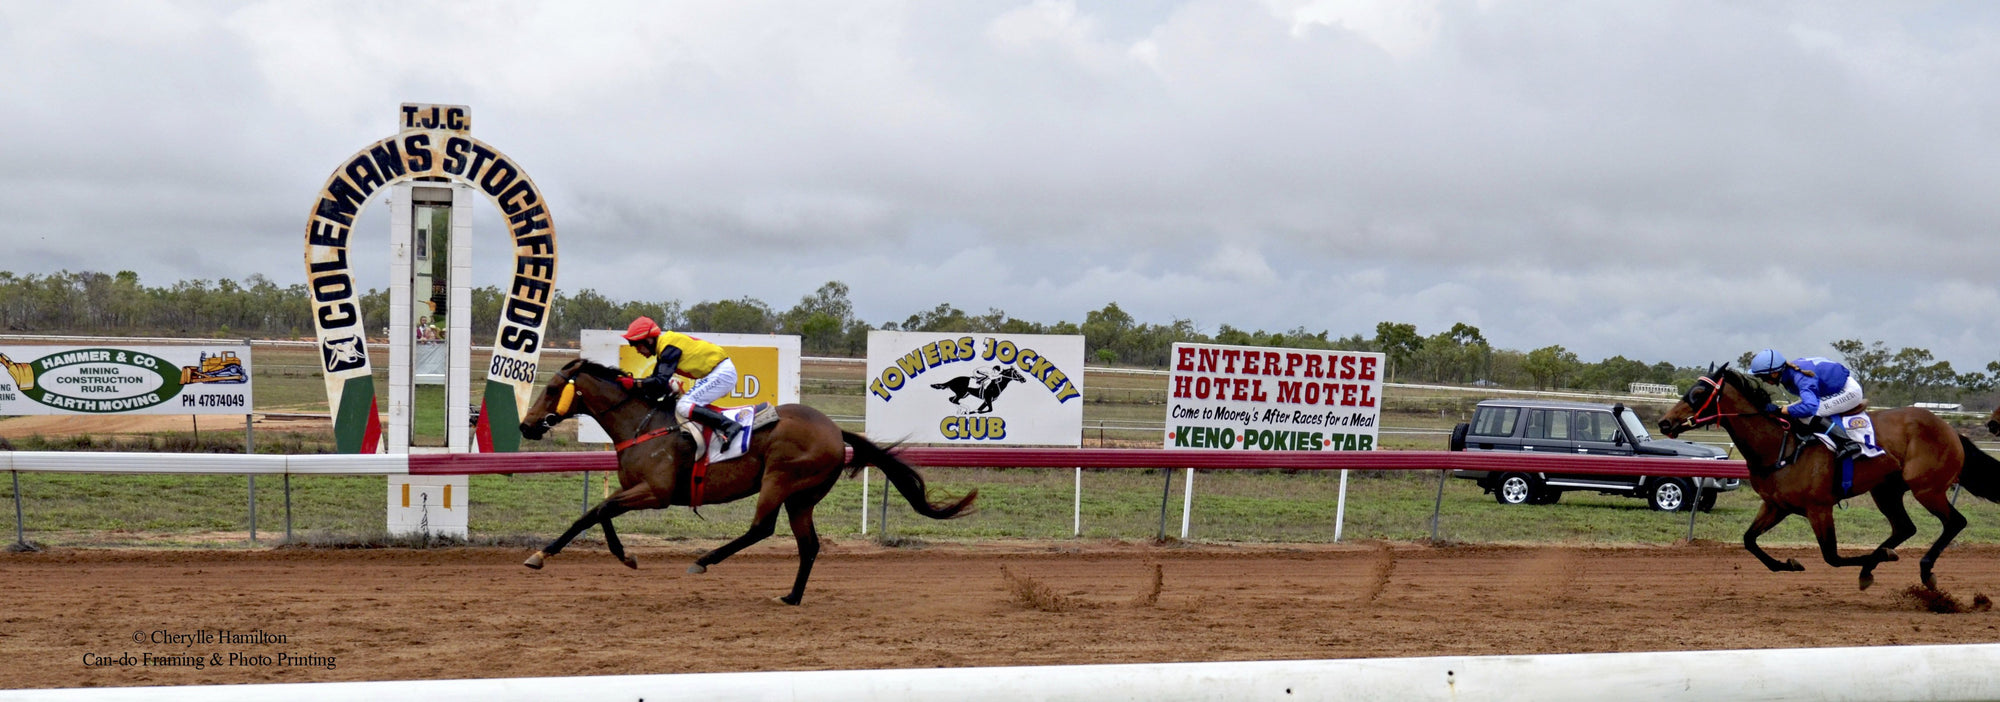 Charters Towers Cup Three In A Row For Crakow